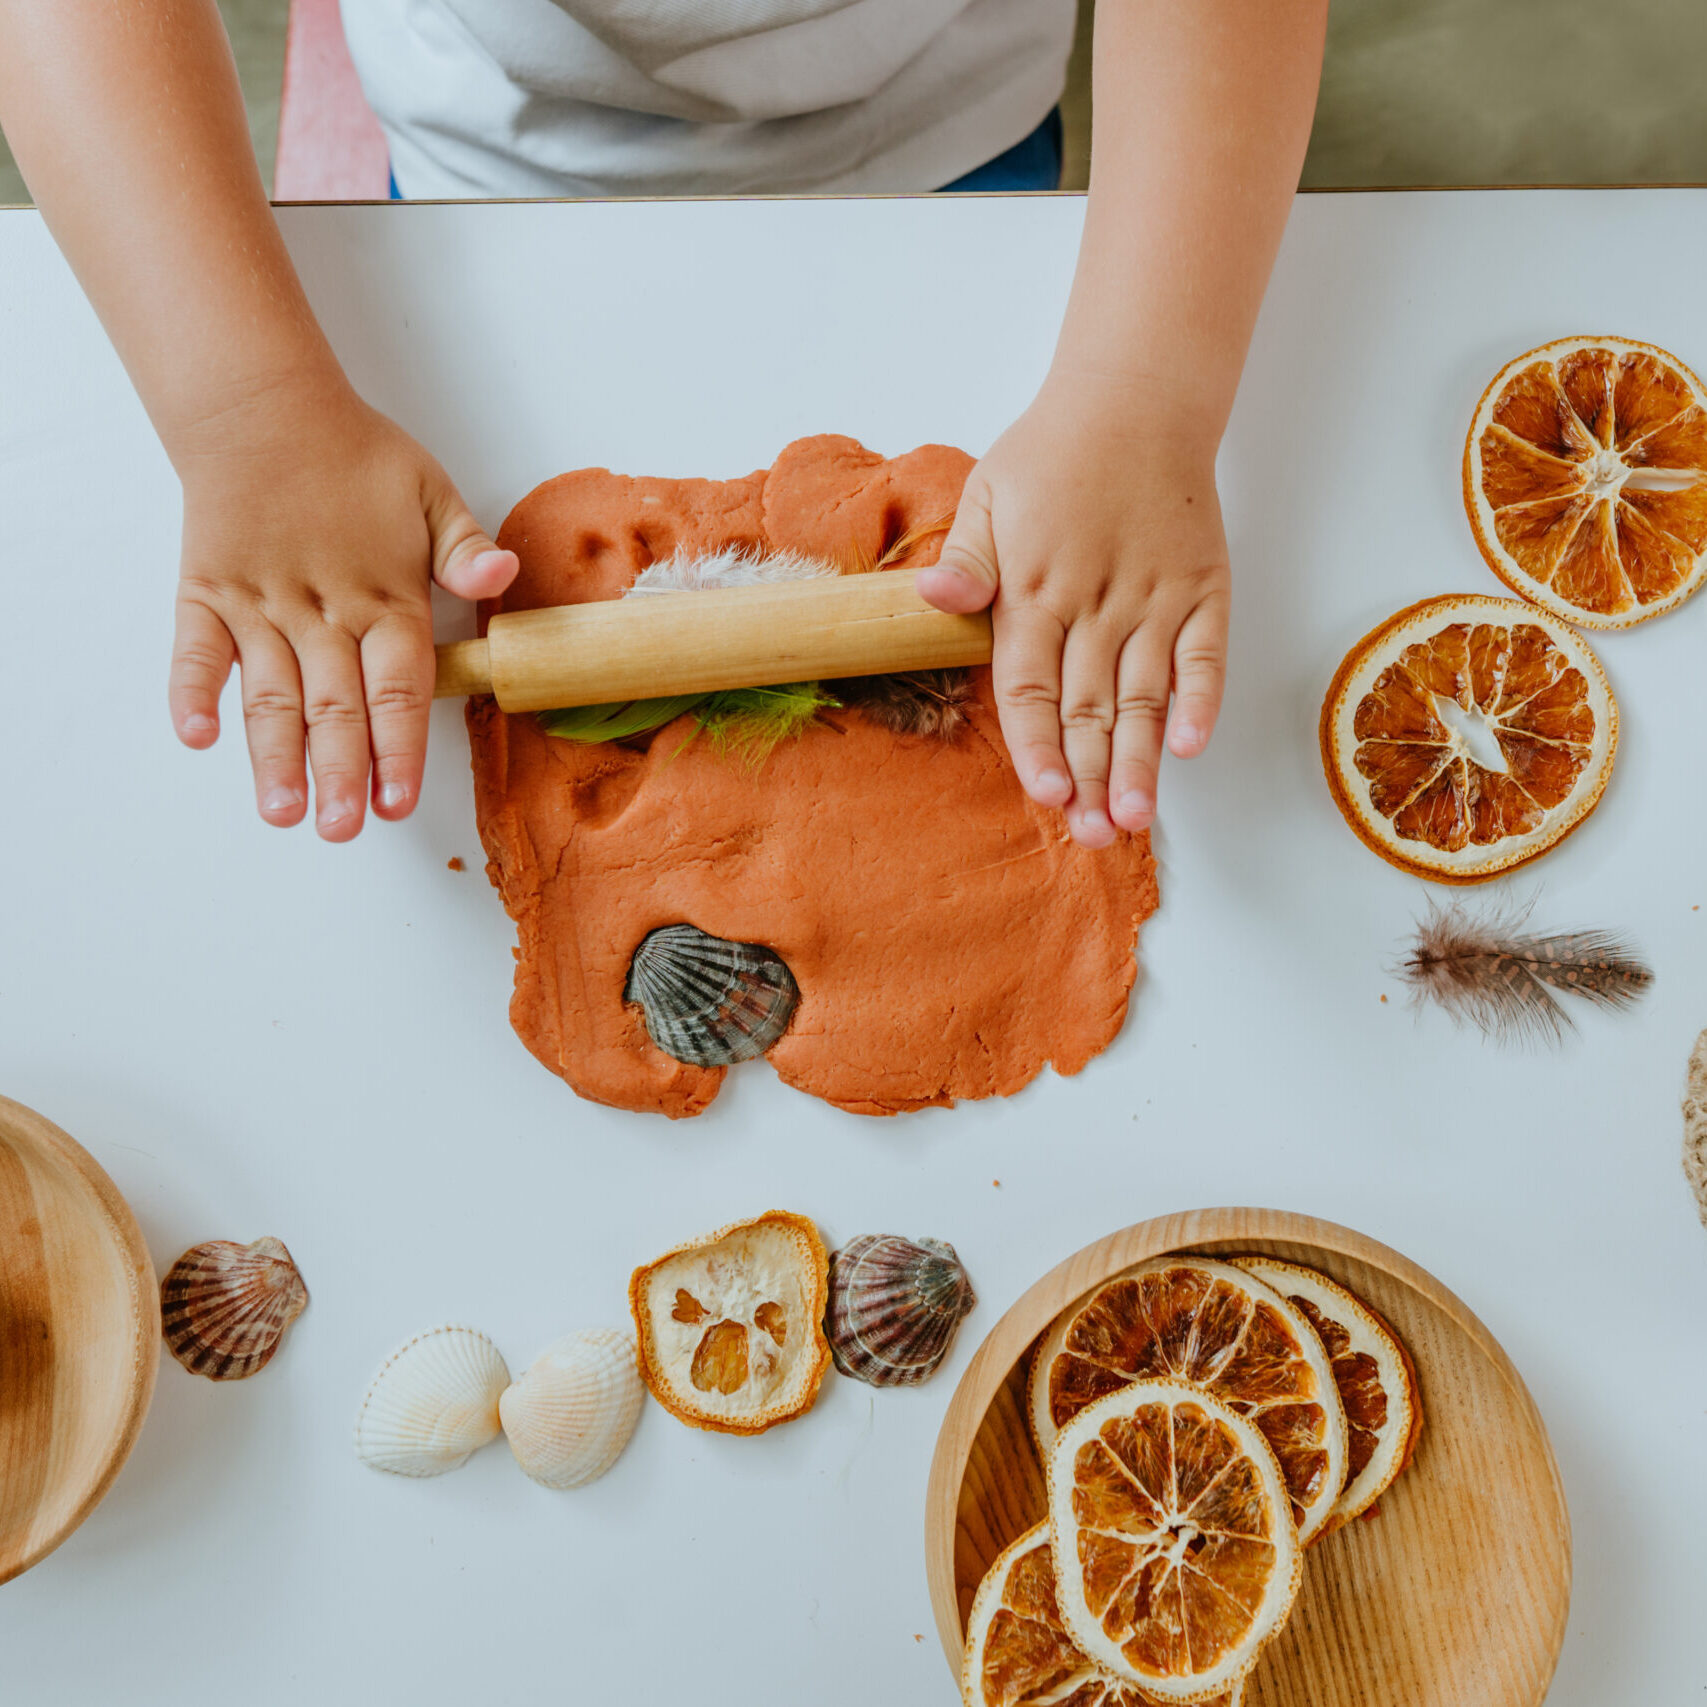 Child making prints on the dough using natural materials dry orange slices, cones, shells, feathers in kindergarten. Early development concept. Top view, flat lay.